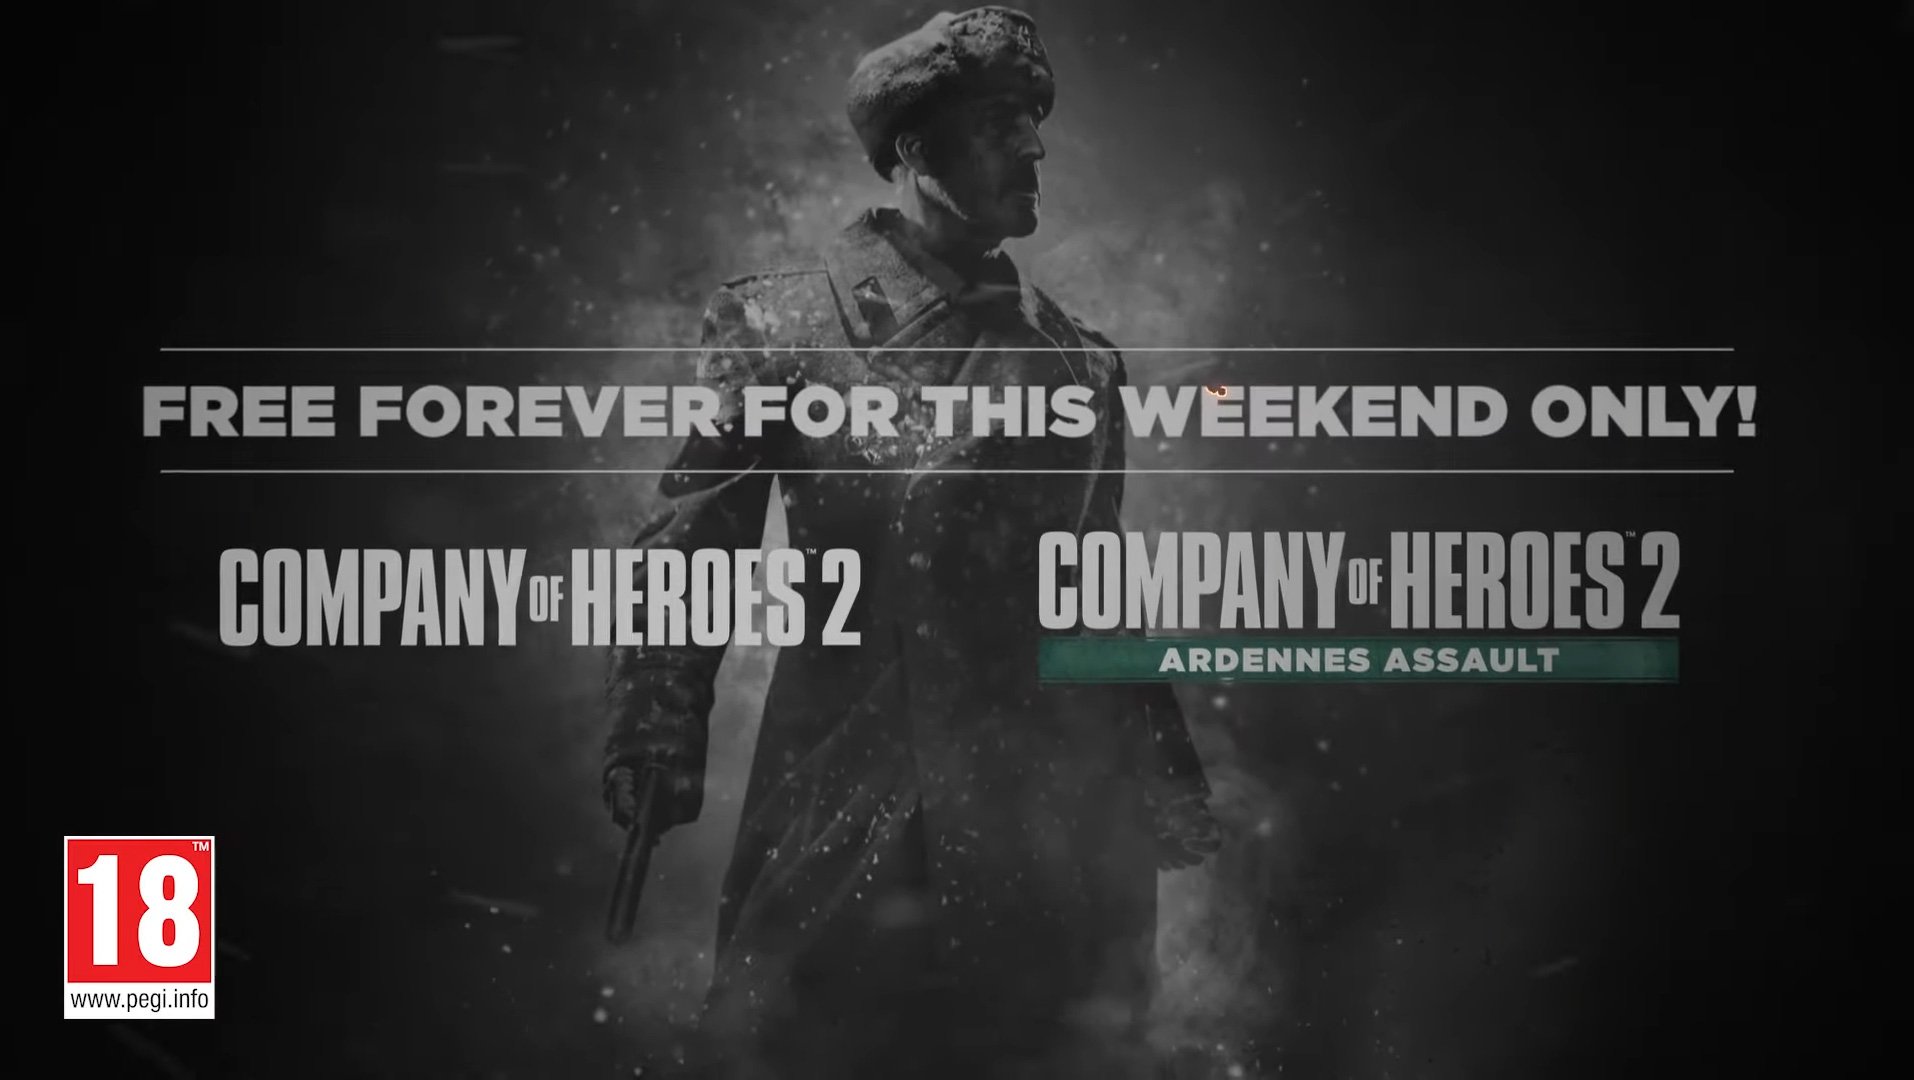 company of heroes 2 mission walkthrough